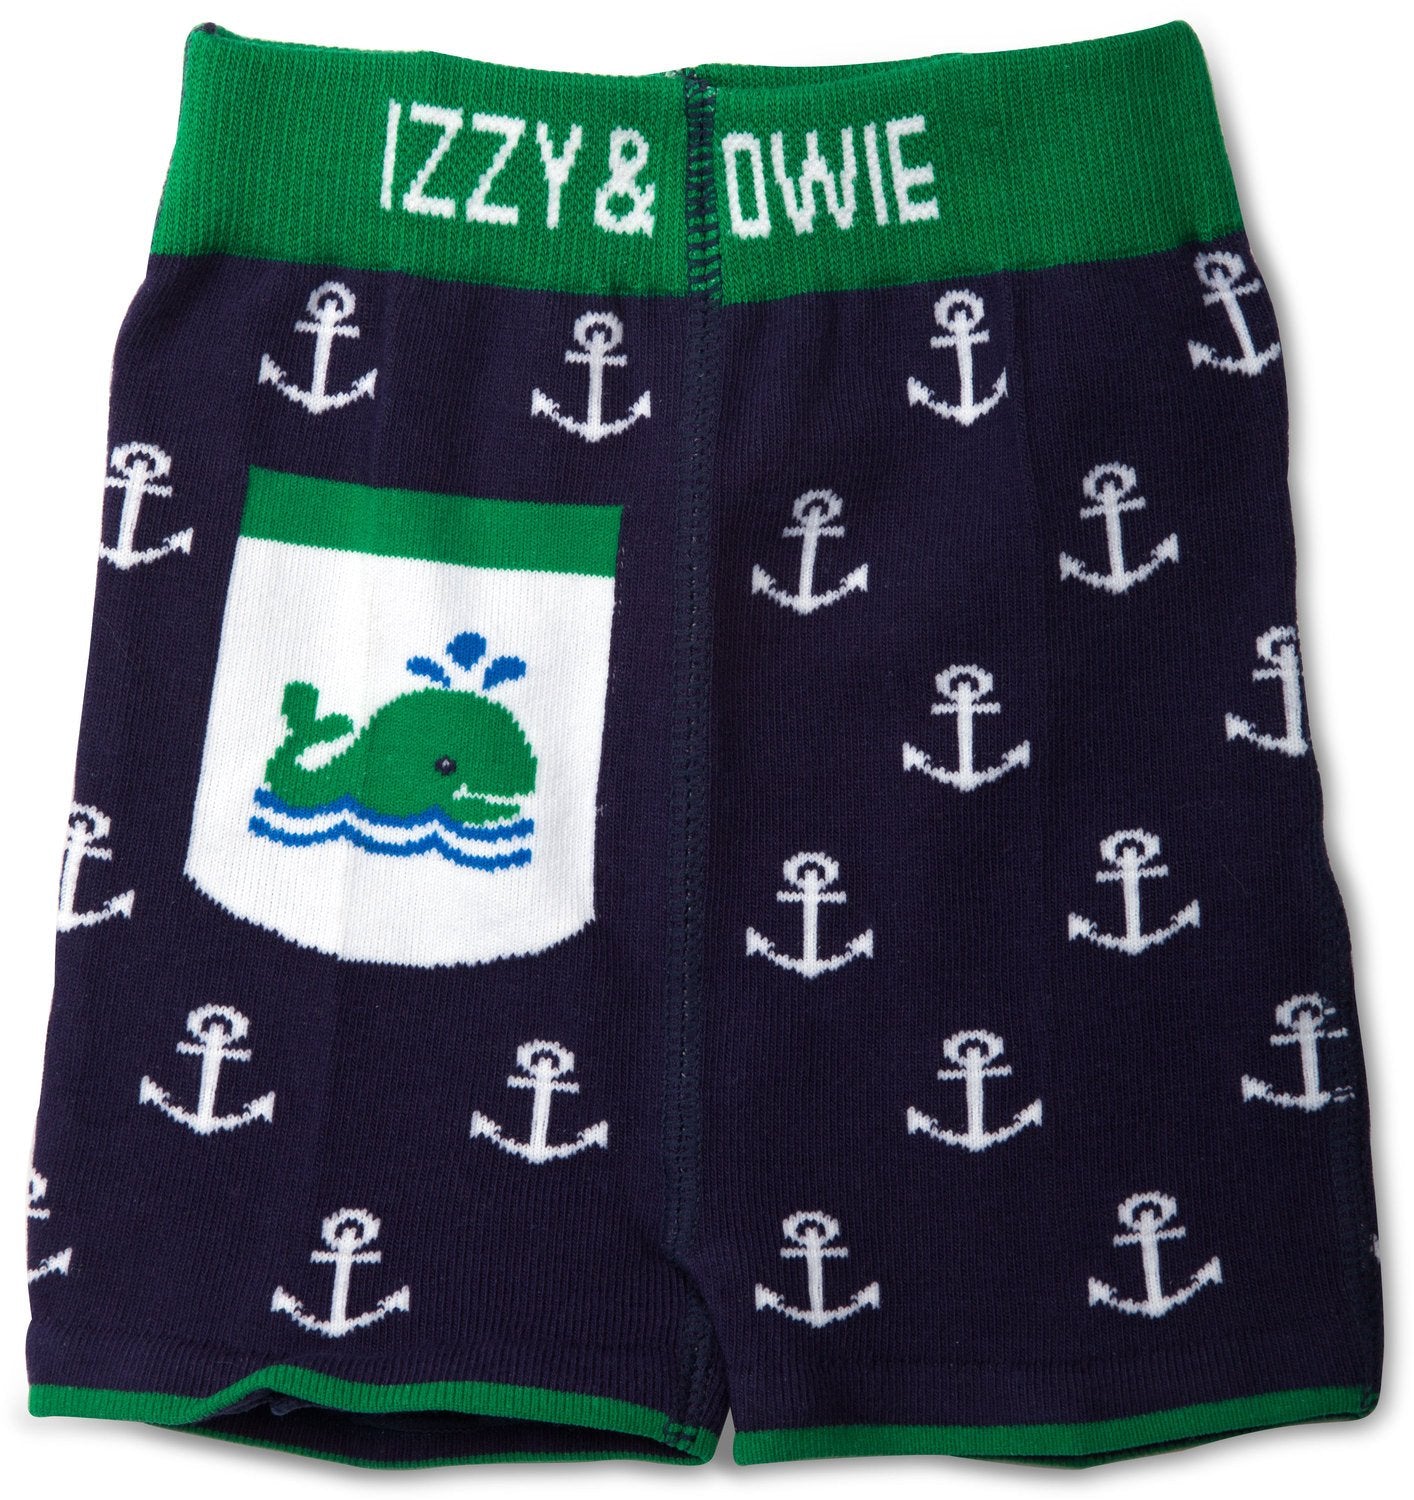 Blue and Green Whale Baby Shorts Baby Shorts Izzy & Owie - GigglesGear.com